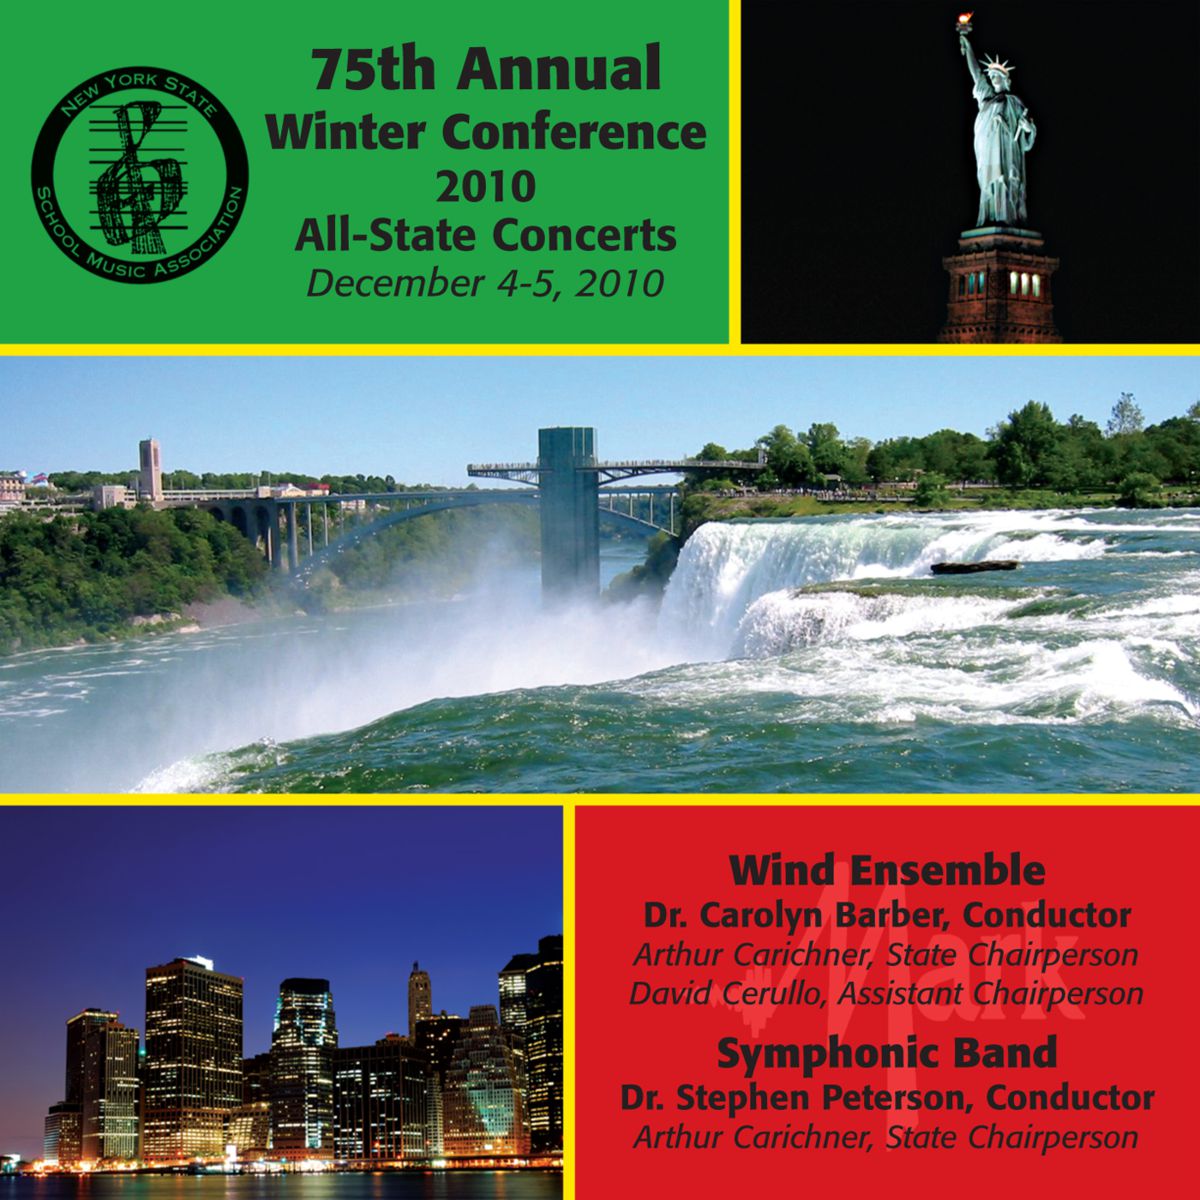 2010 New York State School Music Association: All-State Wind Ensemble and All-State Symphonic Band - click here